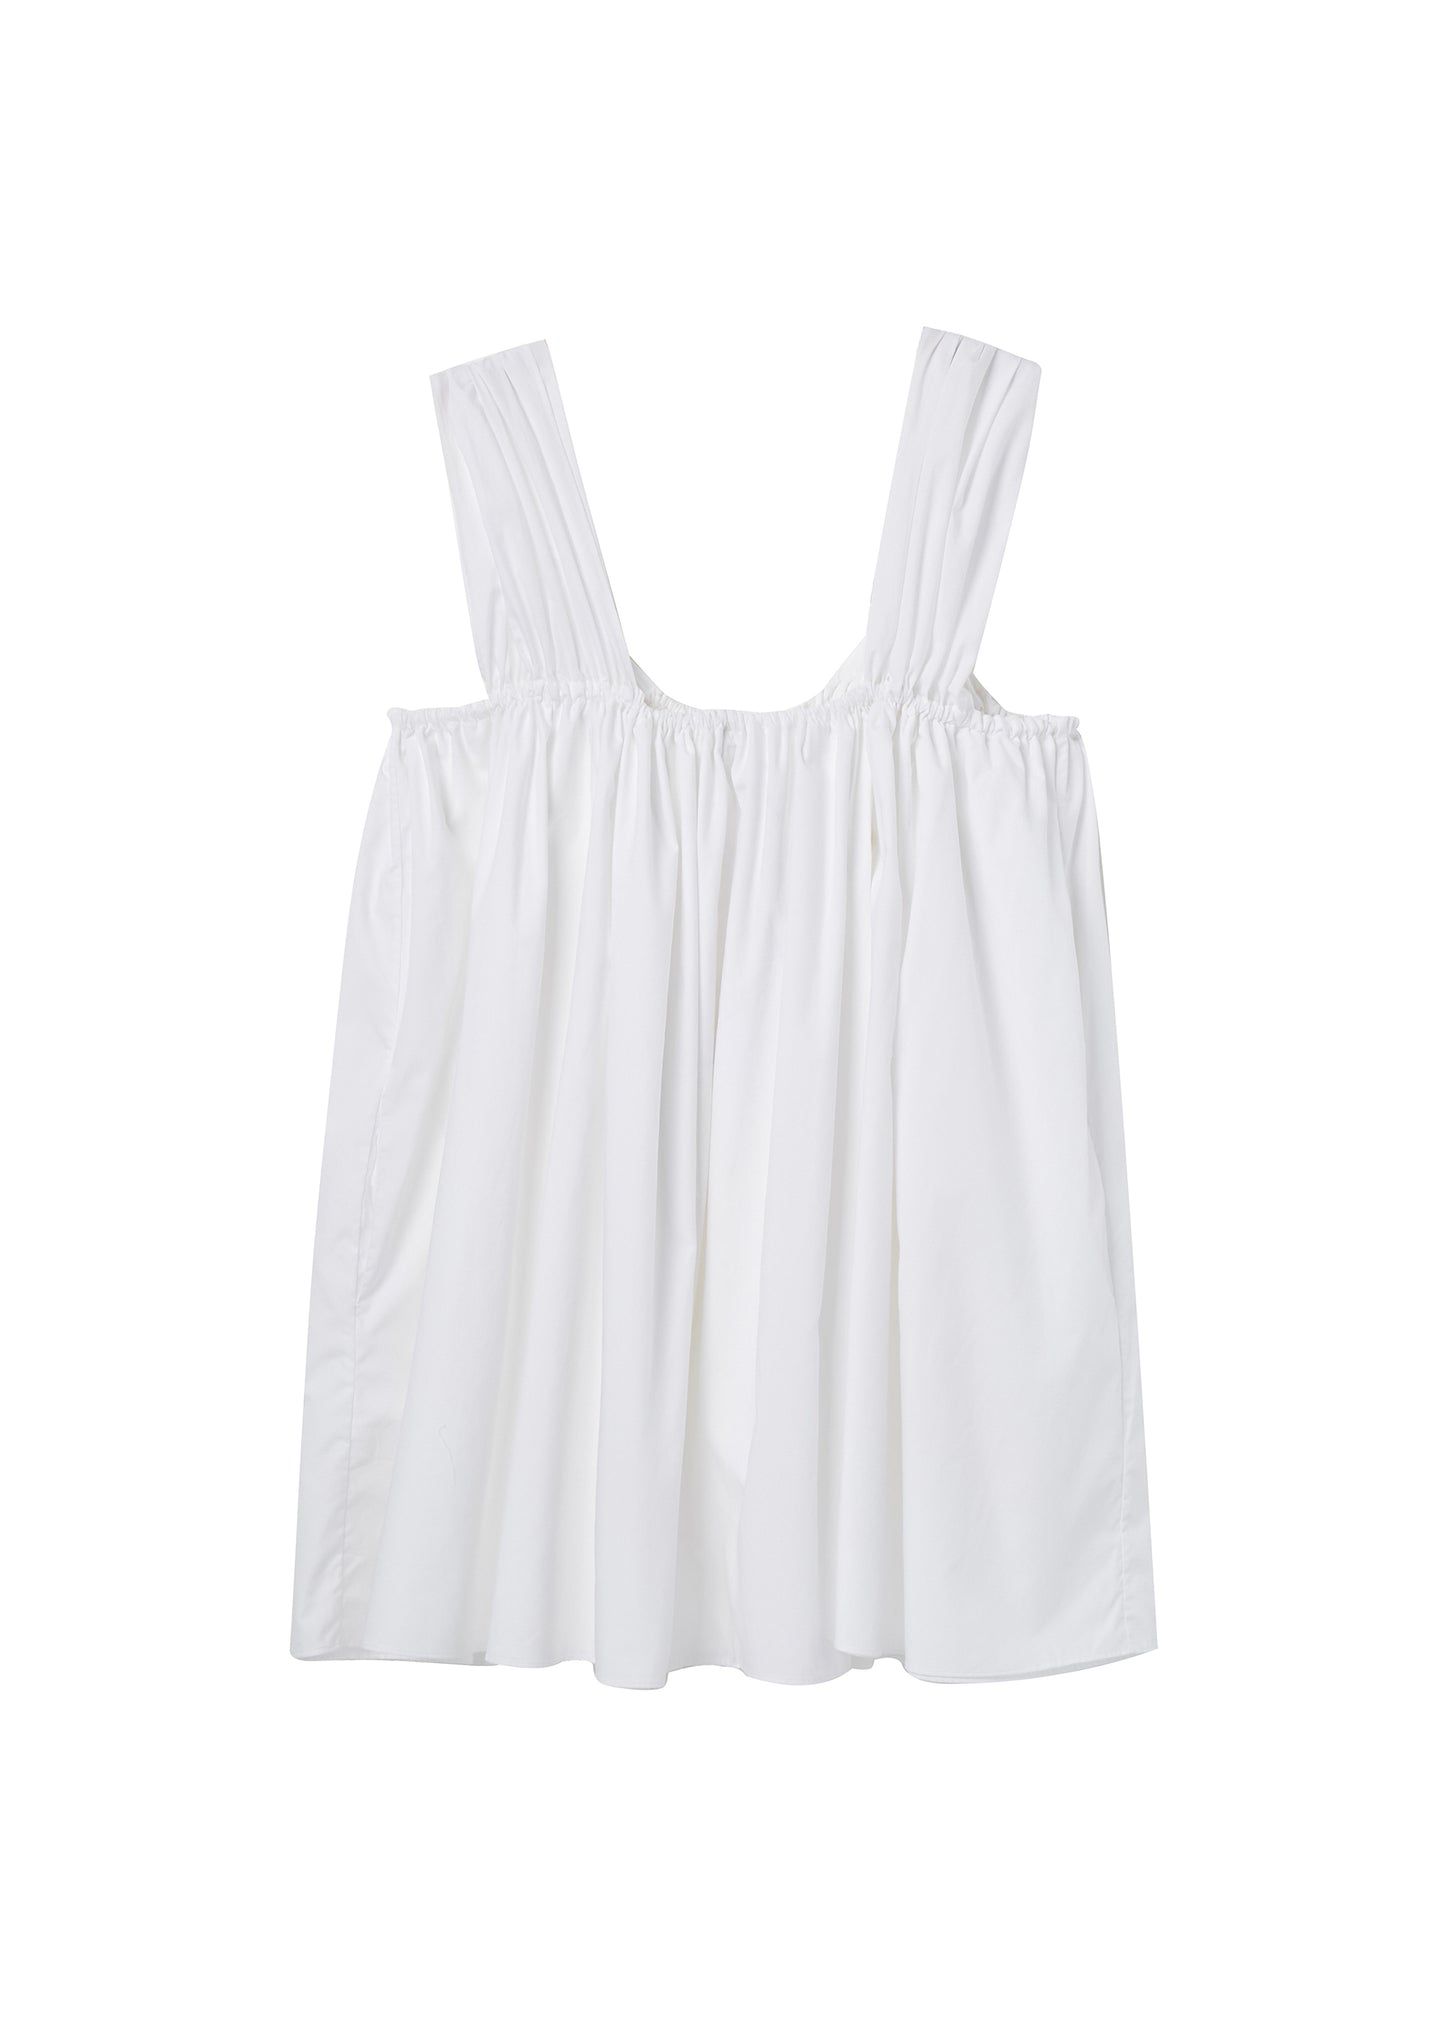 Bloom Doll Dress in White Cotton